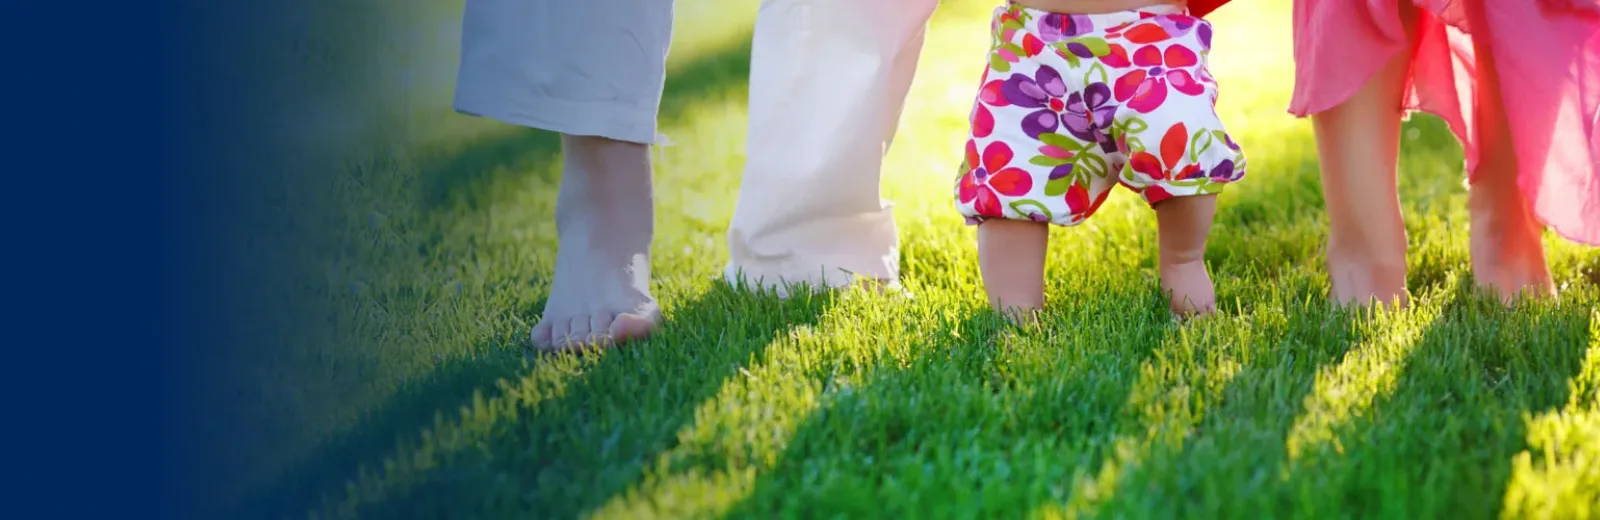 Family standing in green grass